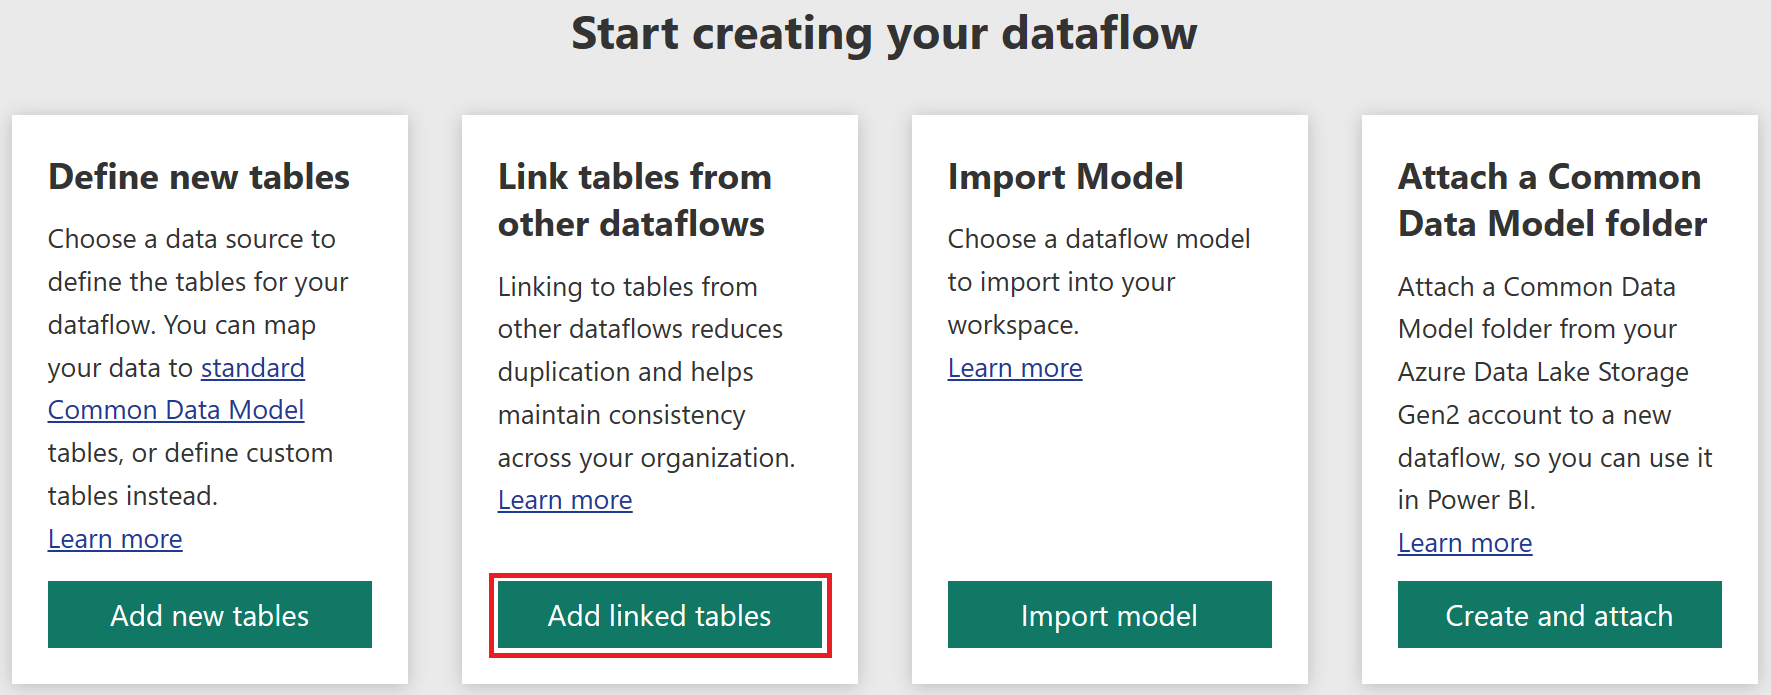 Screenshot showing how to add linked tables in the Power BI dataflow authoring tool.